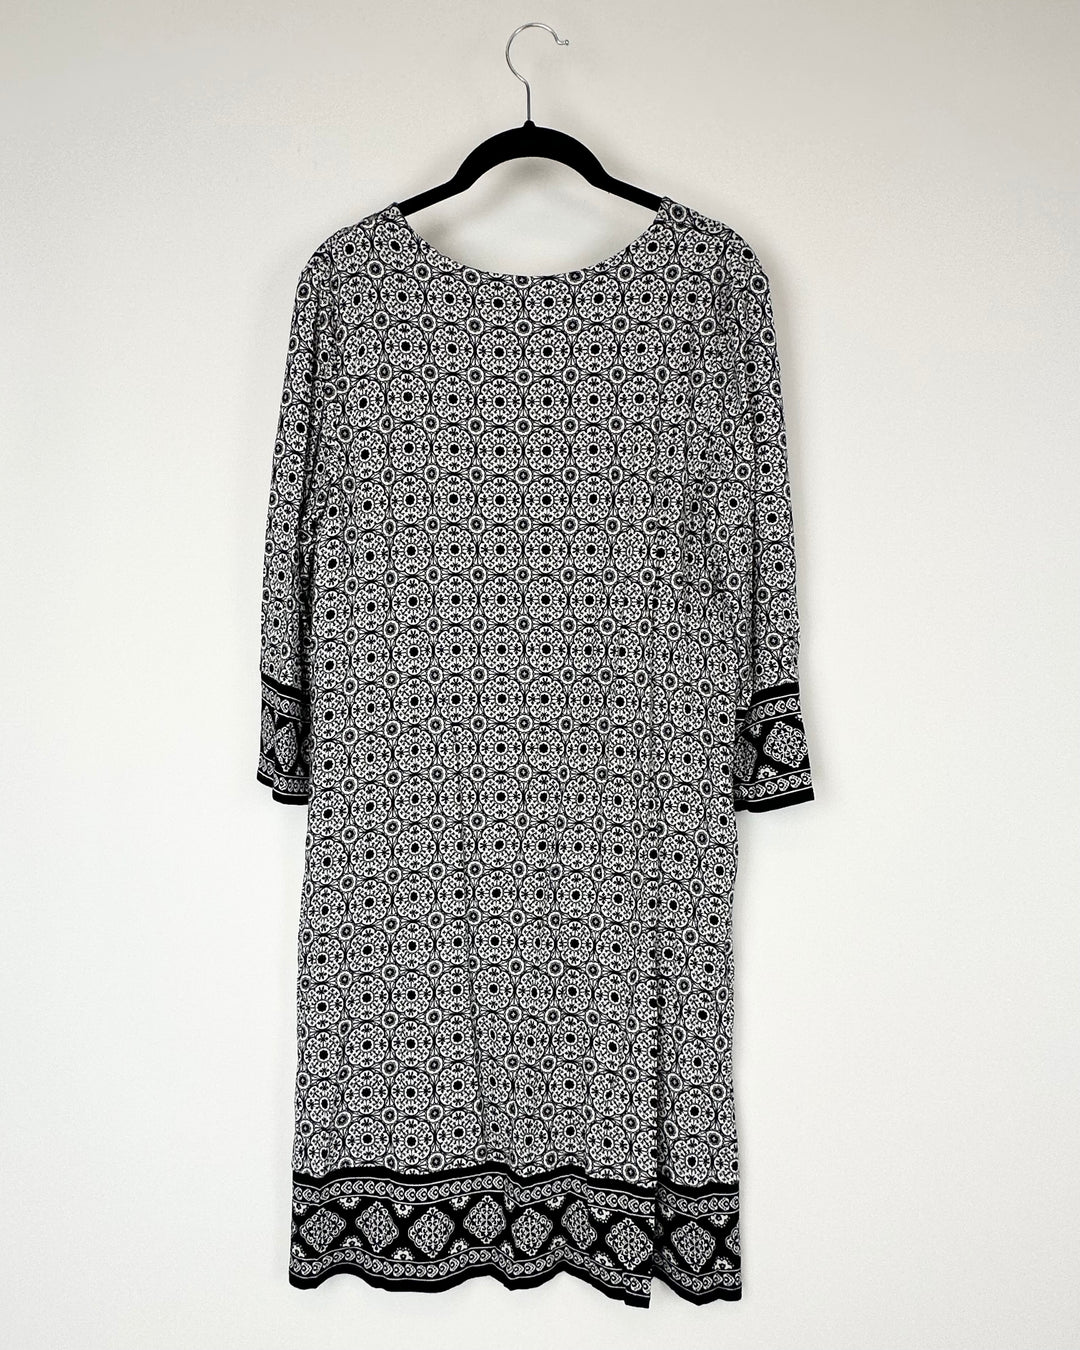 Black and White Pattern Nightgown - Small